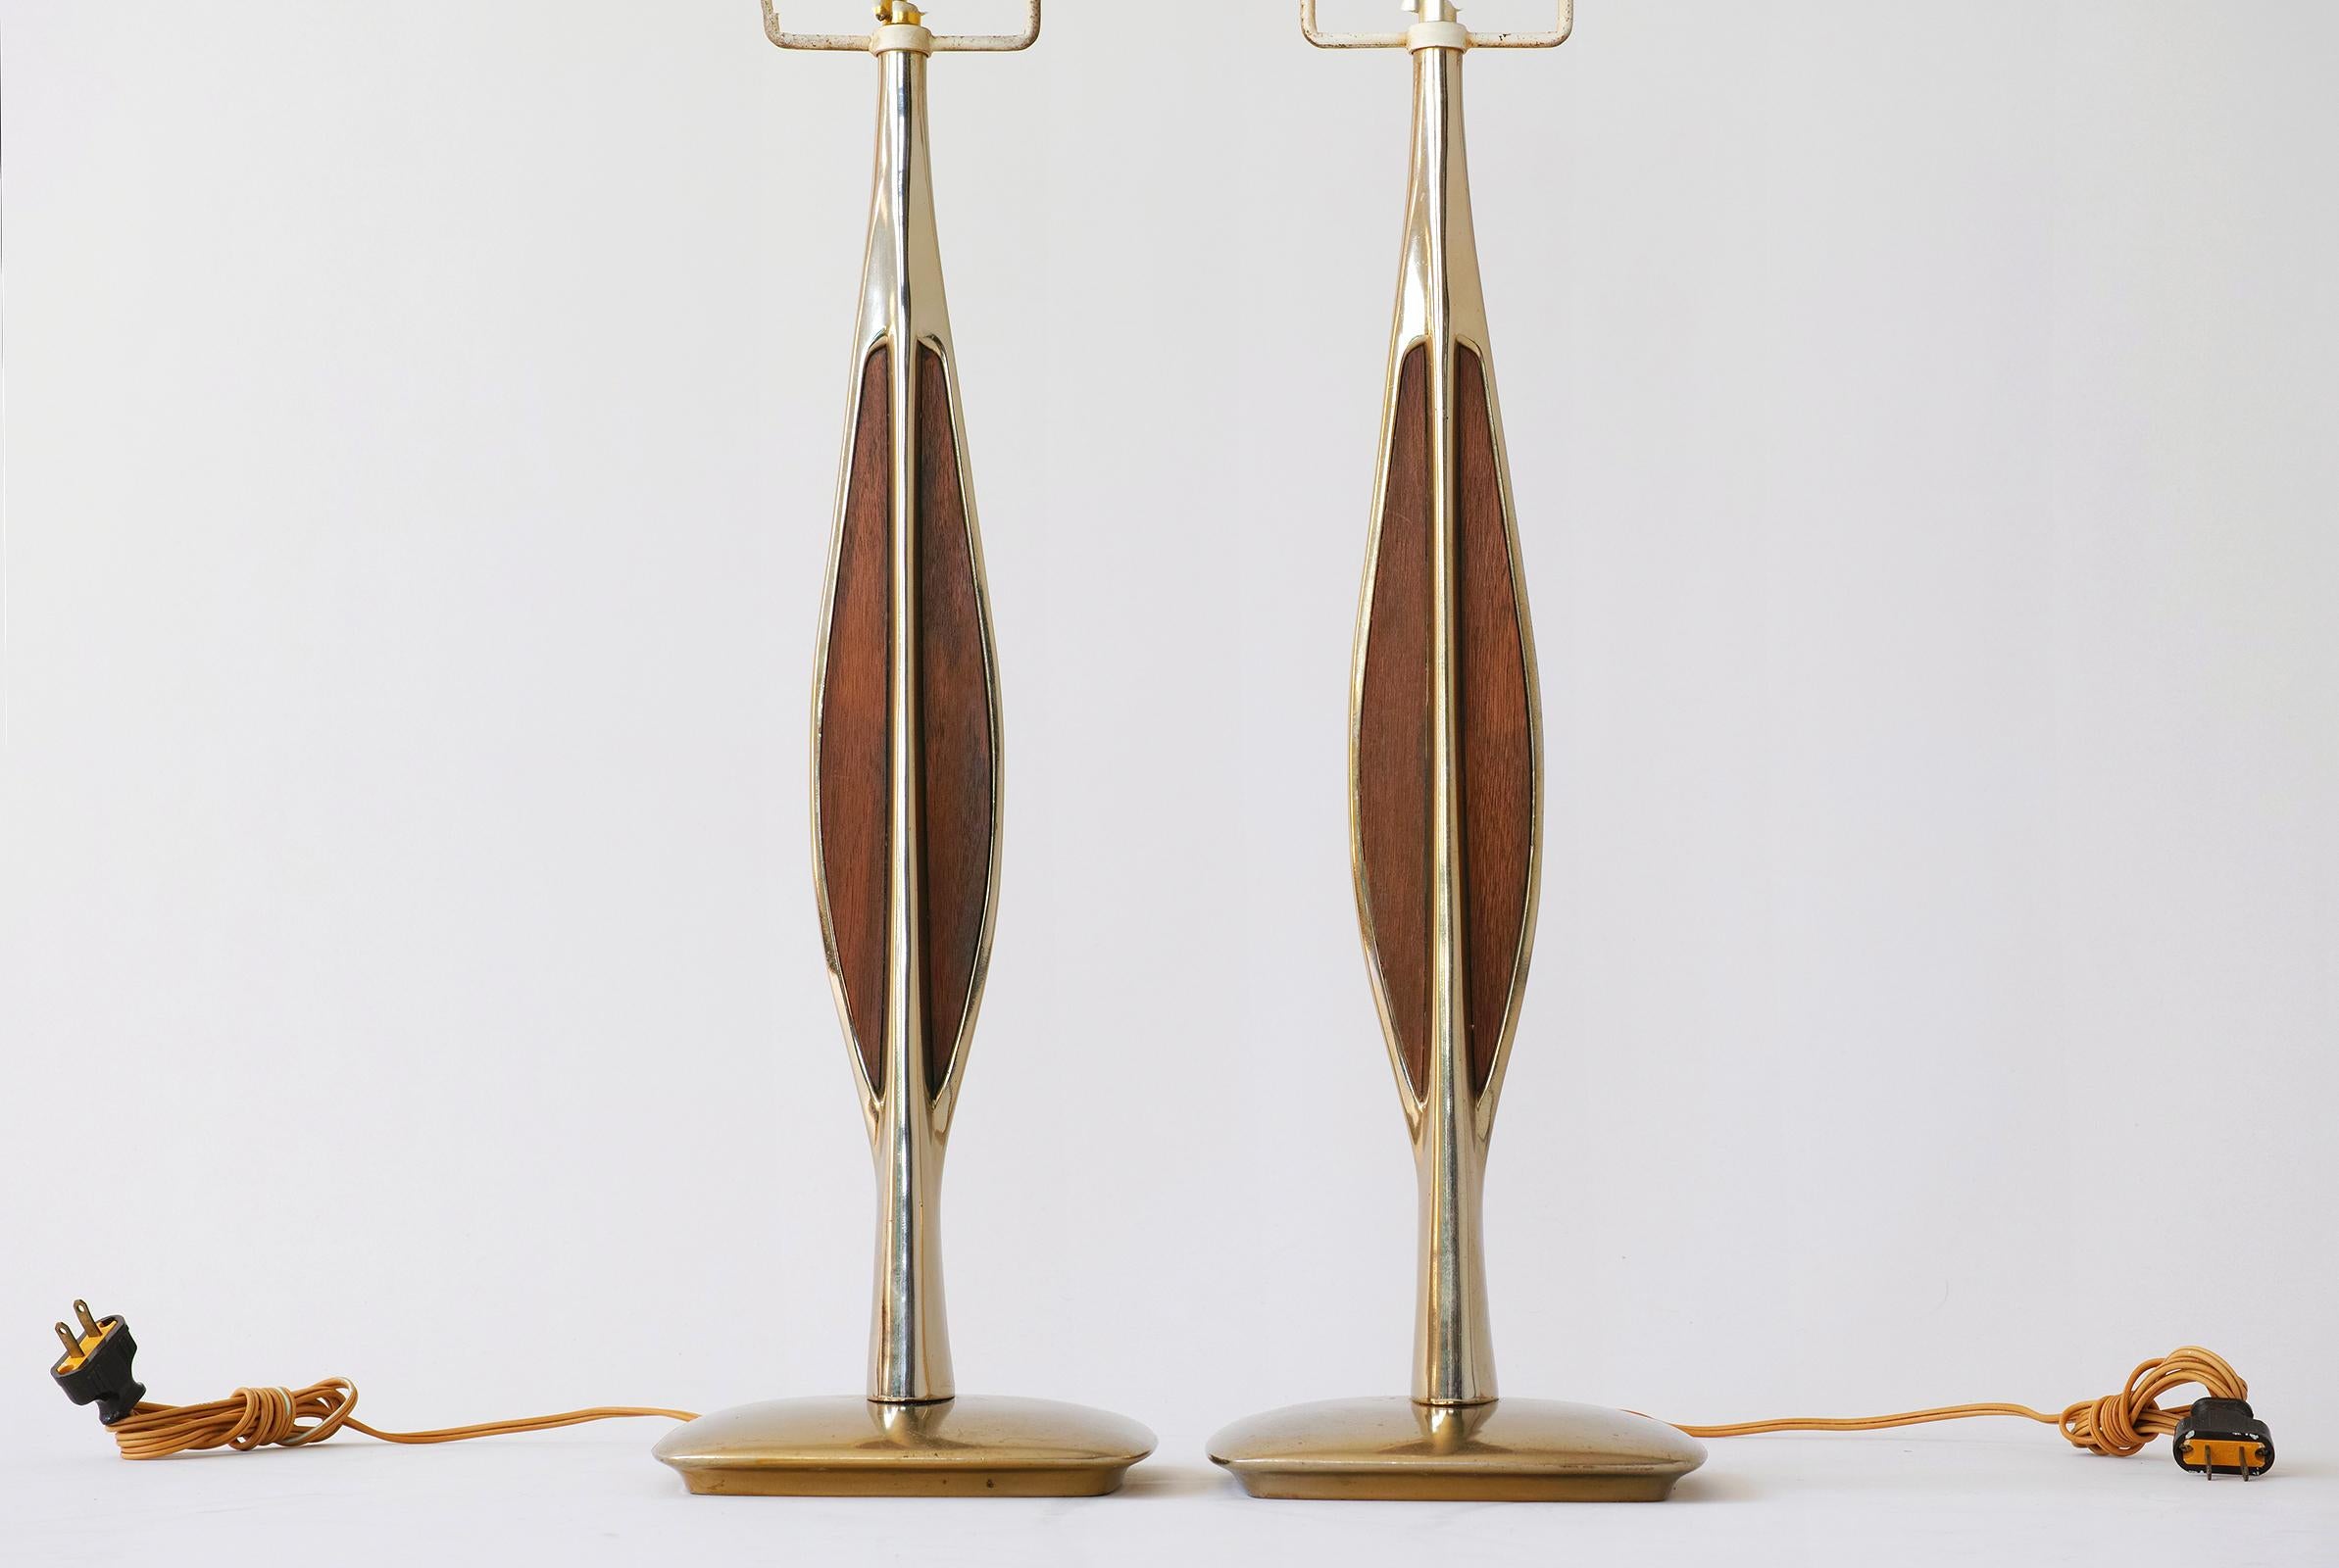 American Mid-Century Modern Brass and Wood Table Lamps by Laurel